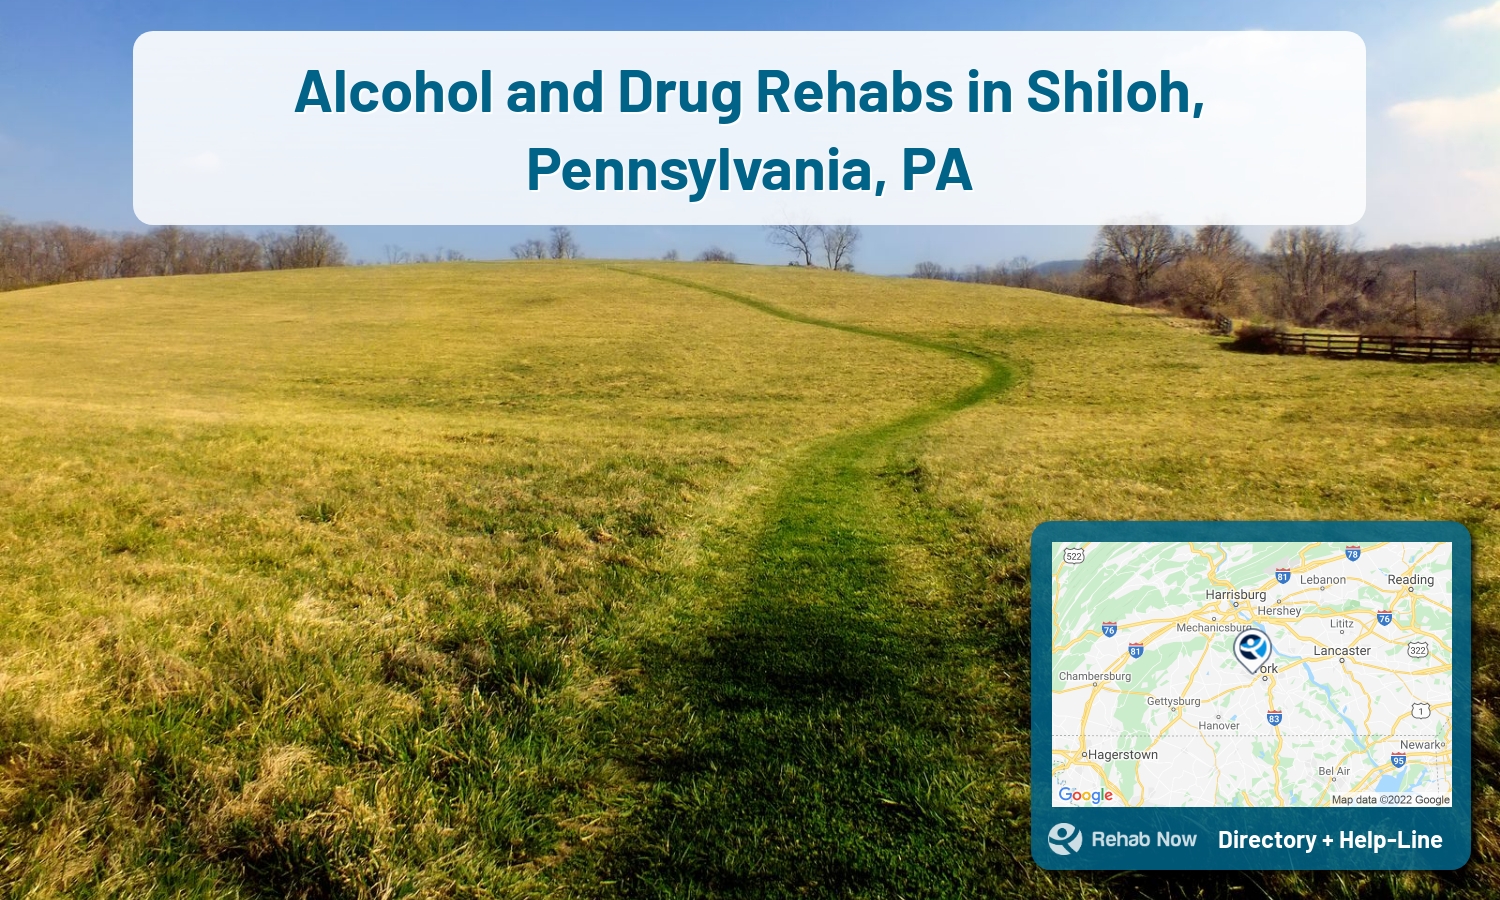 View options, availability, treatment methods, and more, for drug rehab and alcohol treatment in Shiloh, Pennsylvania